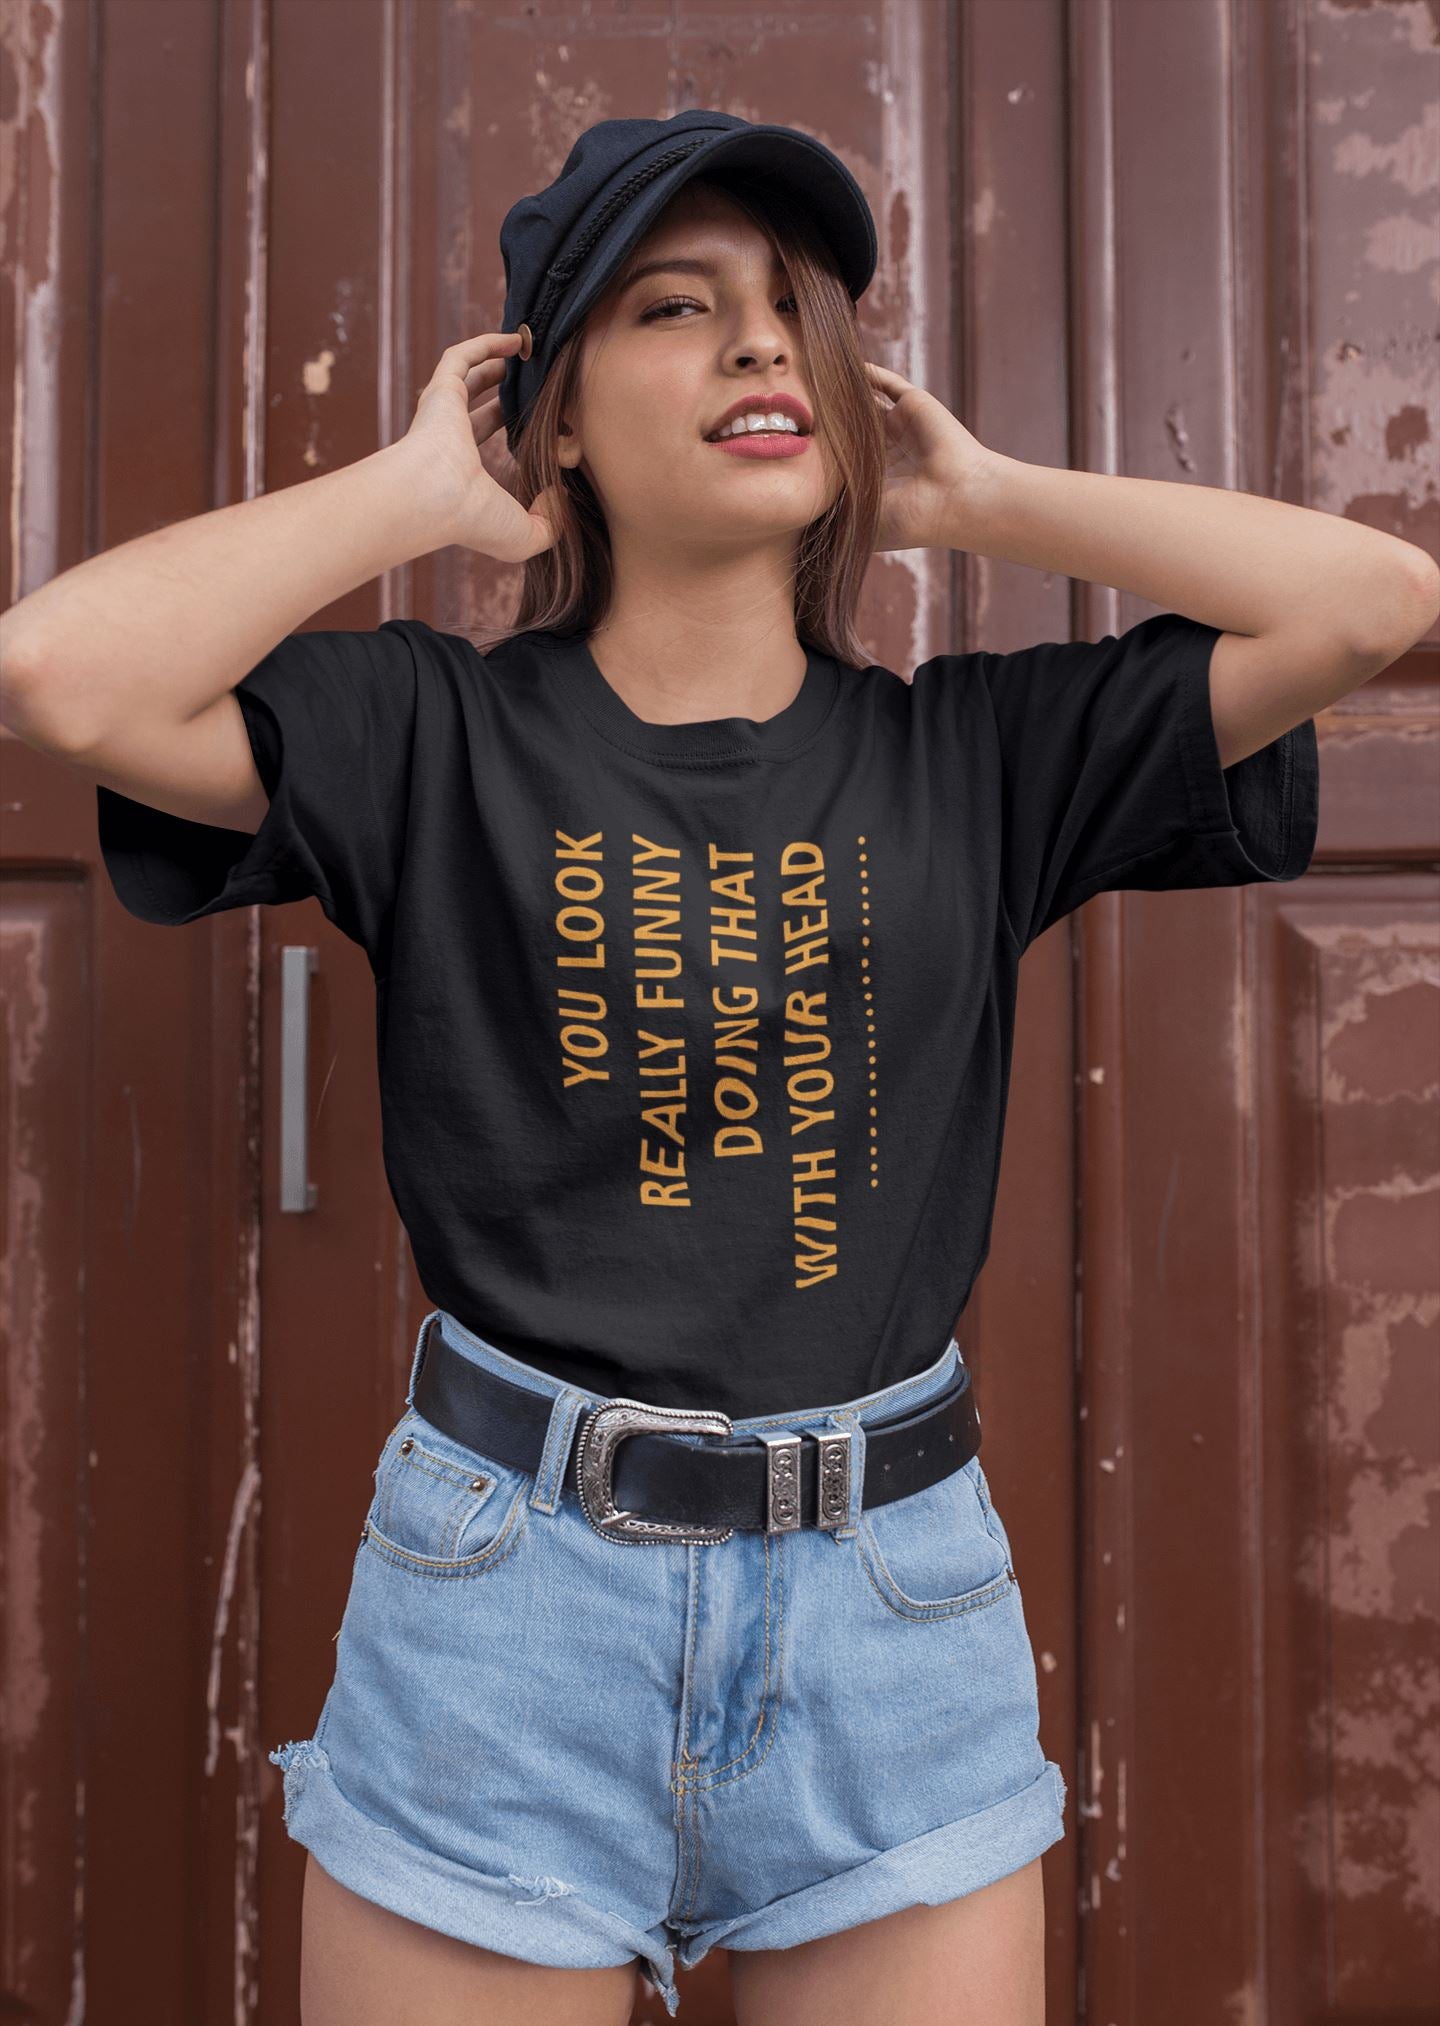 You Look Really Funny Doing That With Your Head Exclusive Funny T Shirt for Men and Women - Catch My Drift India  black, clothing, funny, general, made in india, shirt, t shirt, trending, tsh